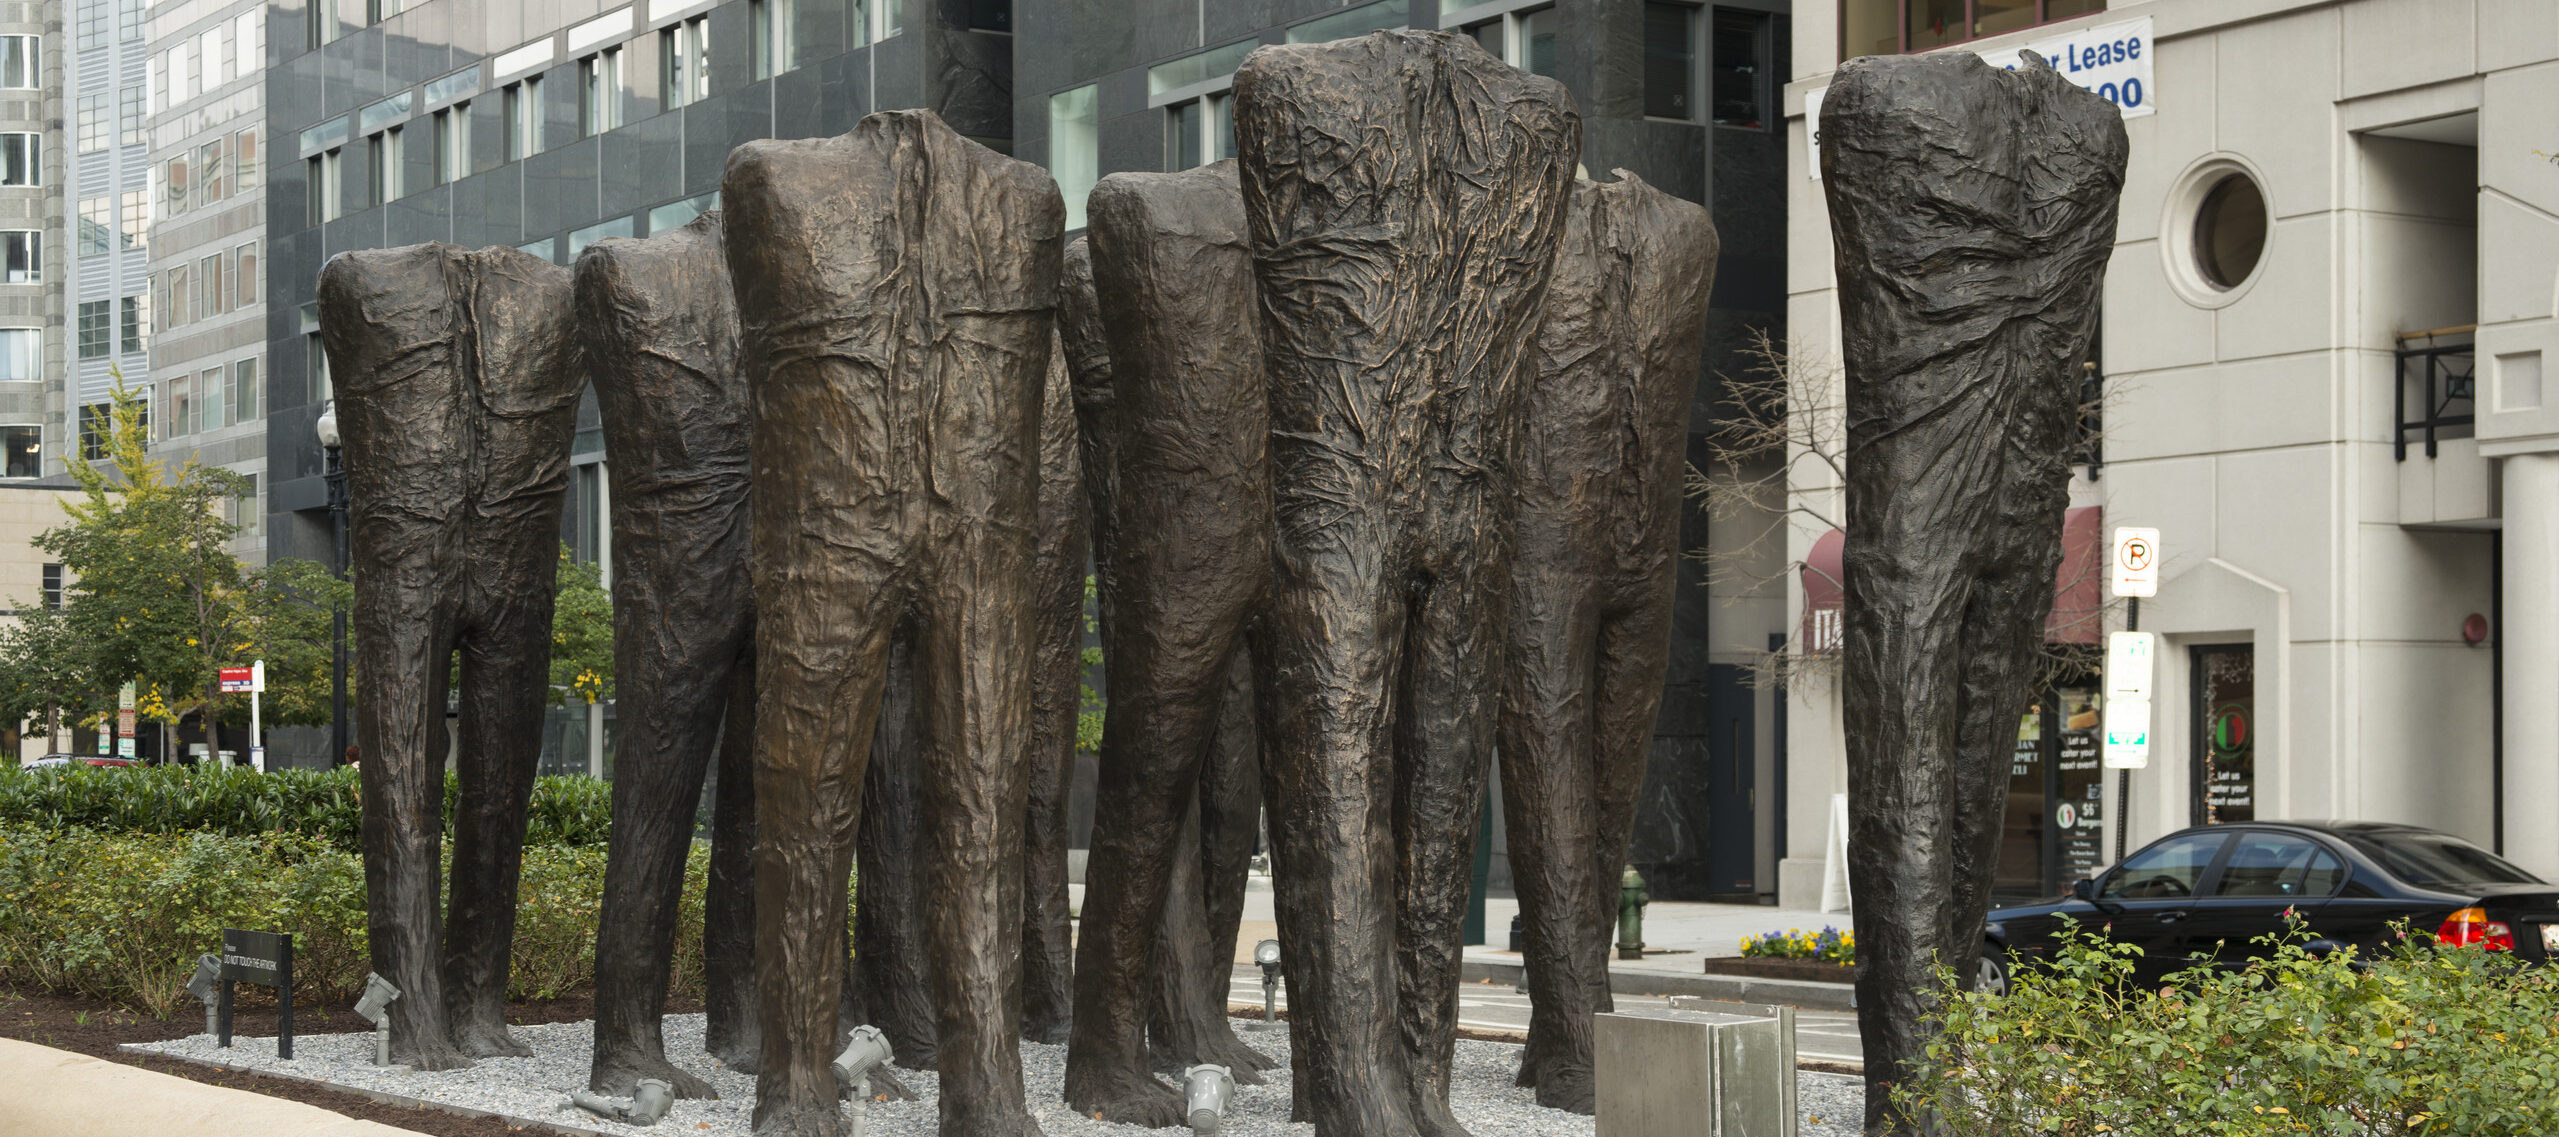 Ten larger-than-life bronze sculptures of human bodies are installed in the middle of a city street. The bodies have no heads or arms, and are striding forward in five rows of two. While they are not naked, their wrinkled body-tight clothing makes no distinction between shirt and pants.